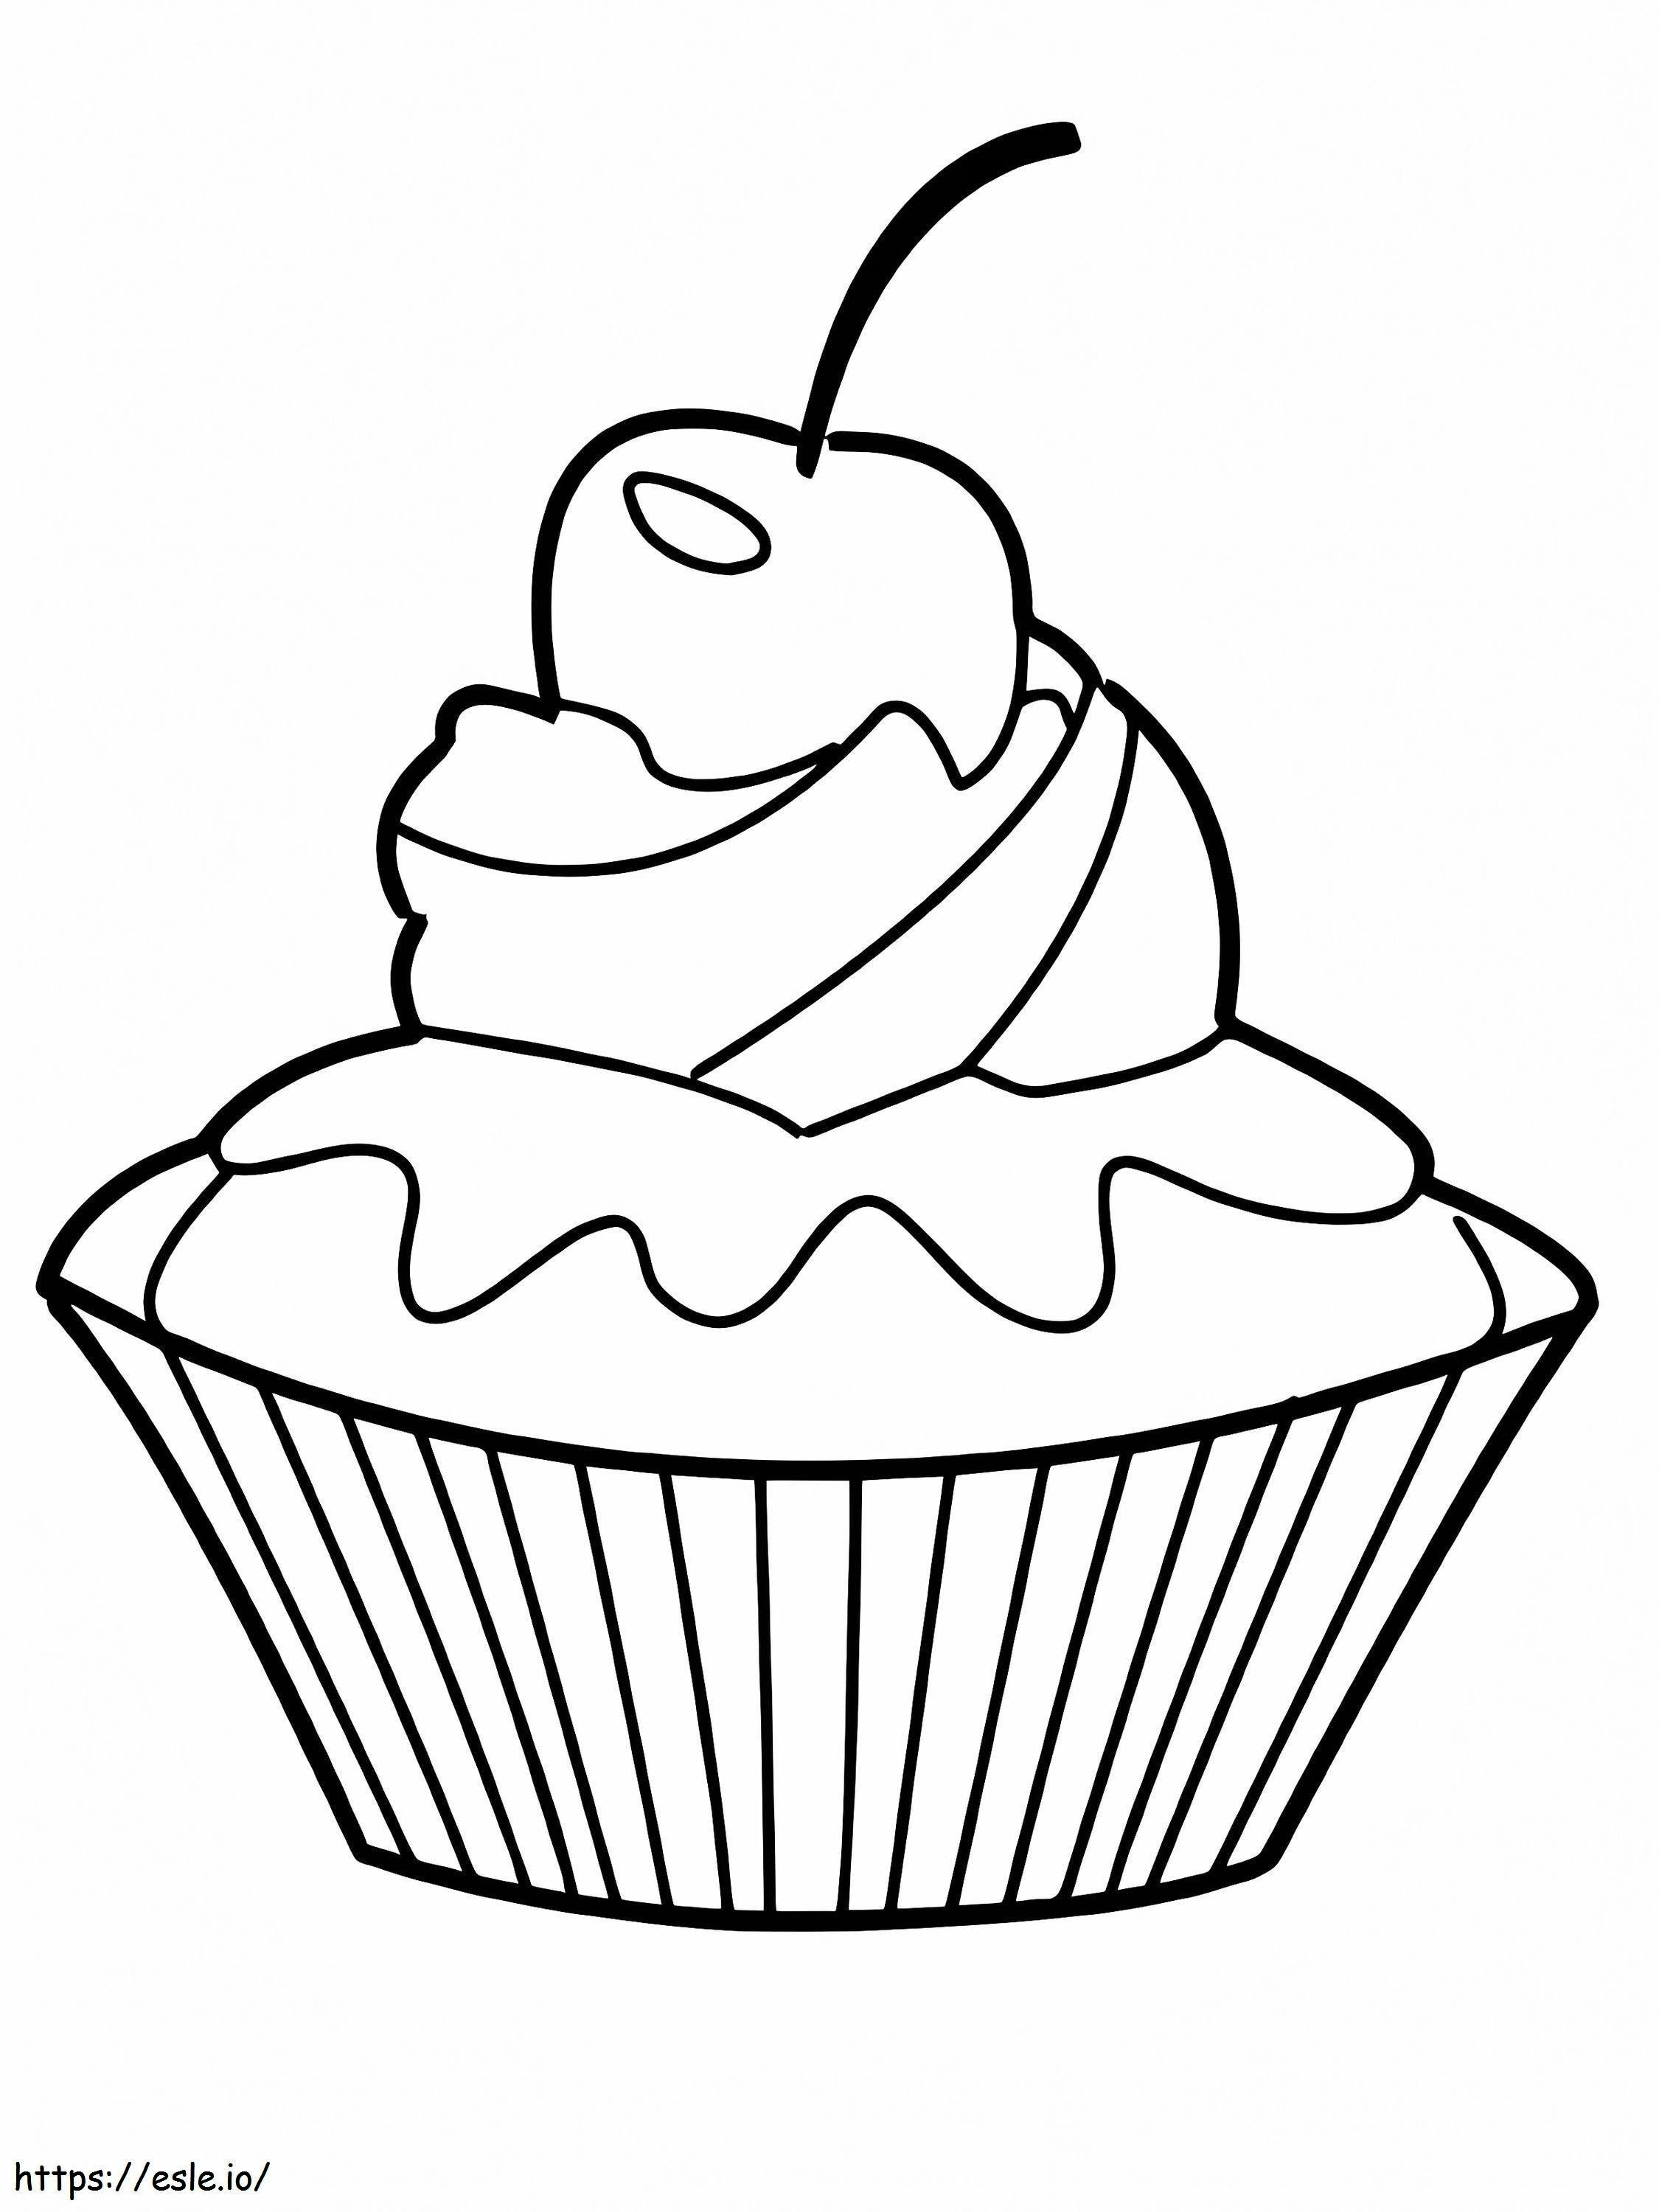 Simple Cupcake coloring page